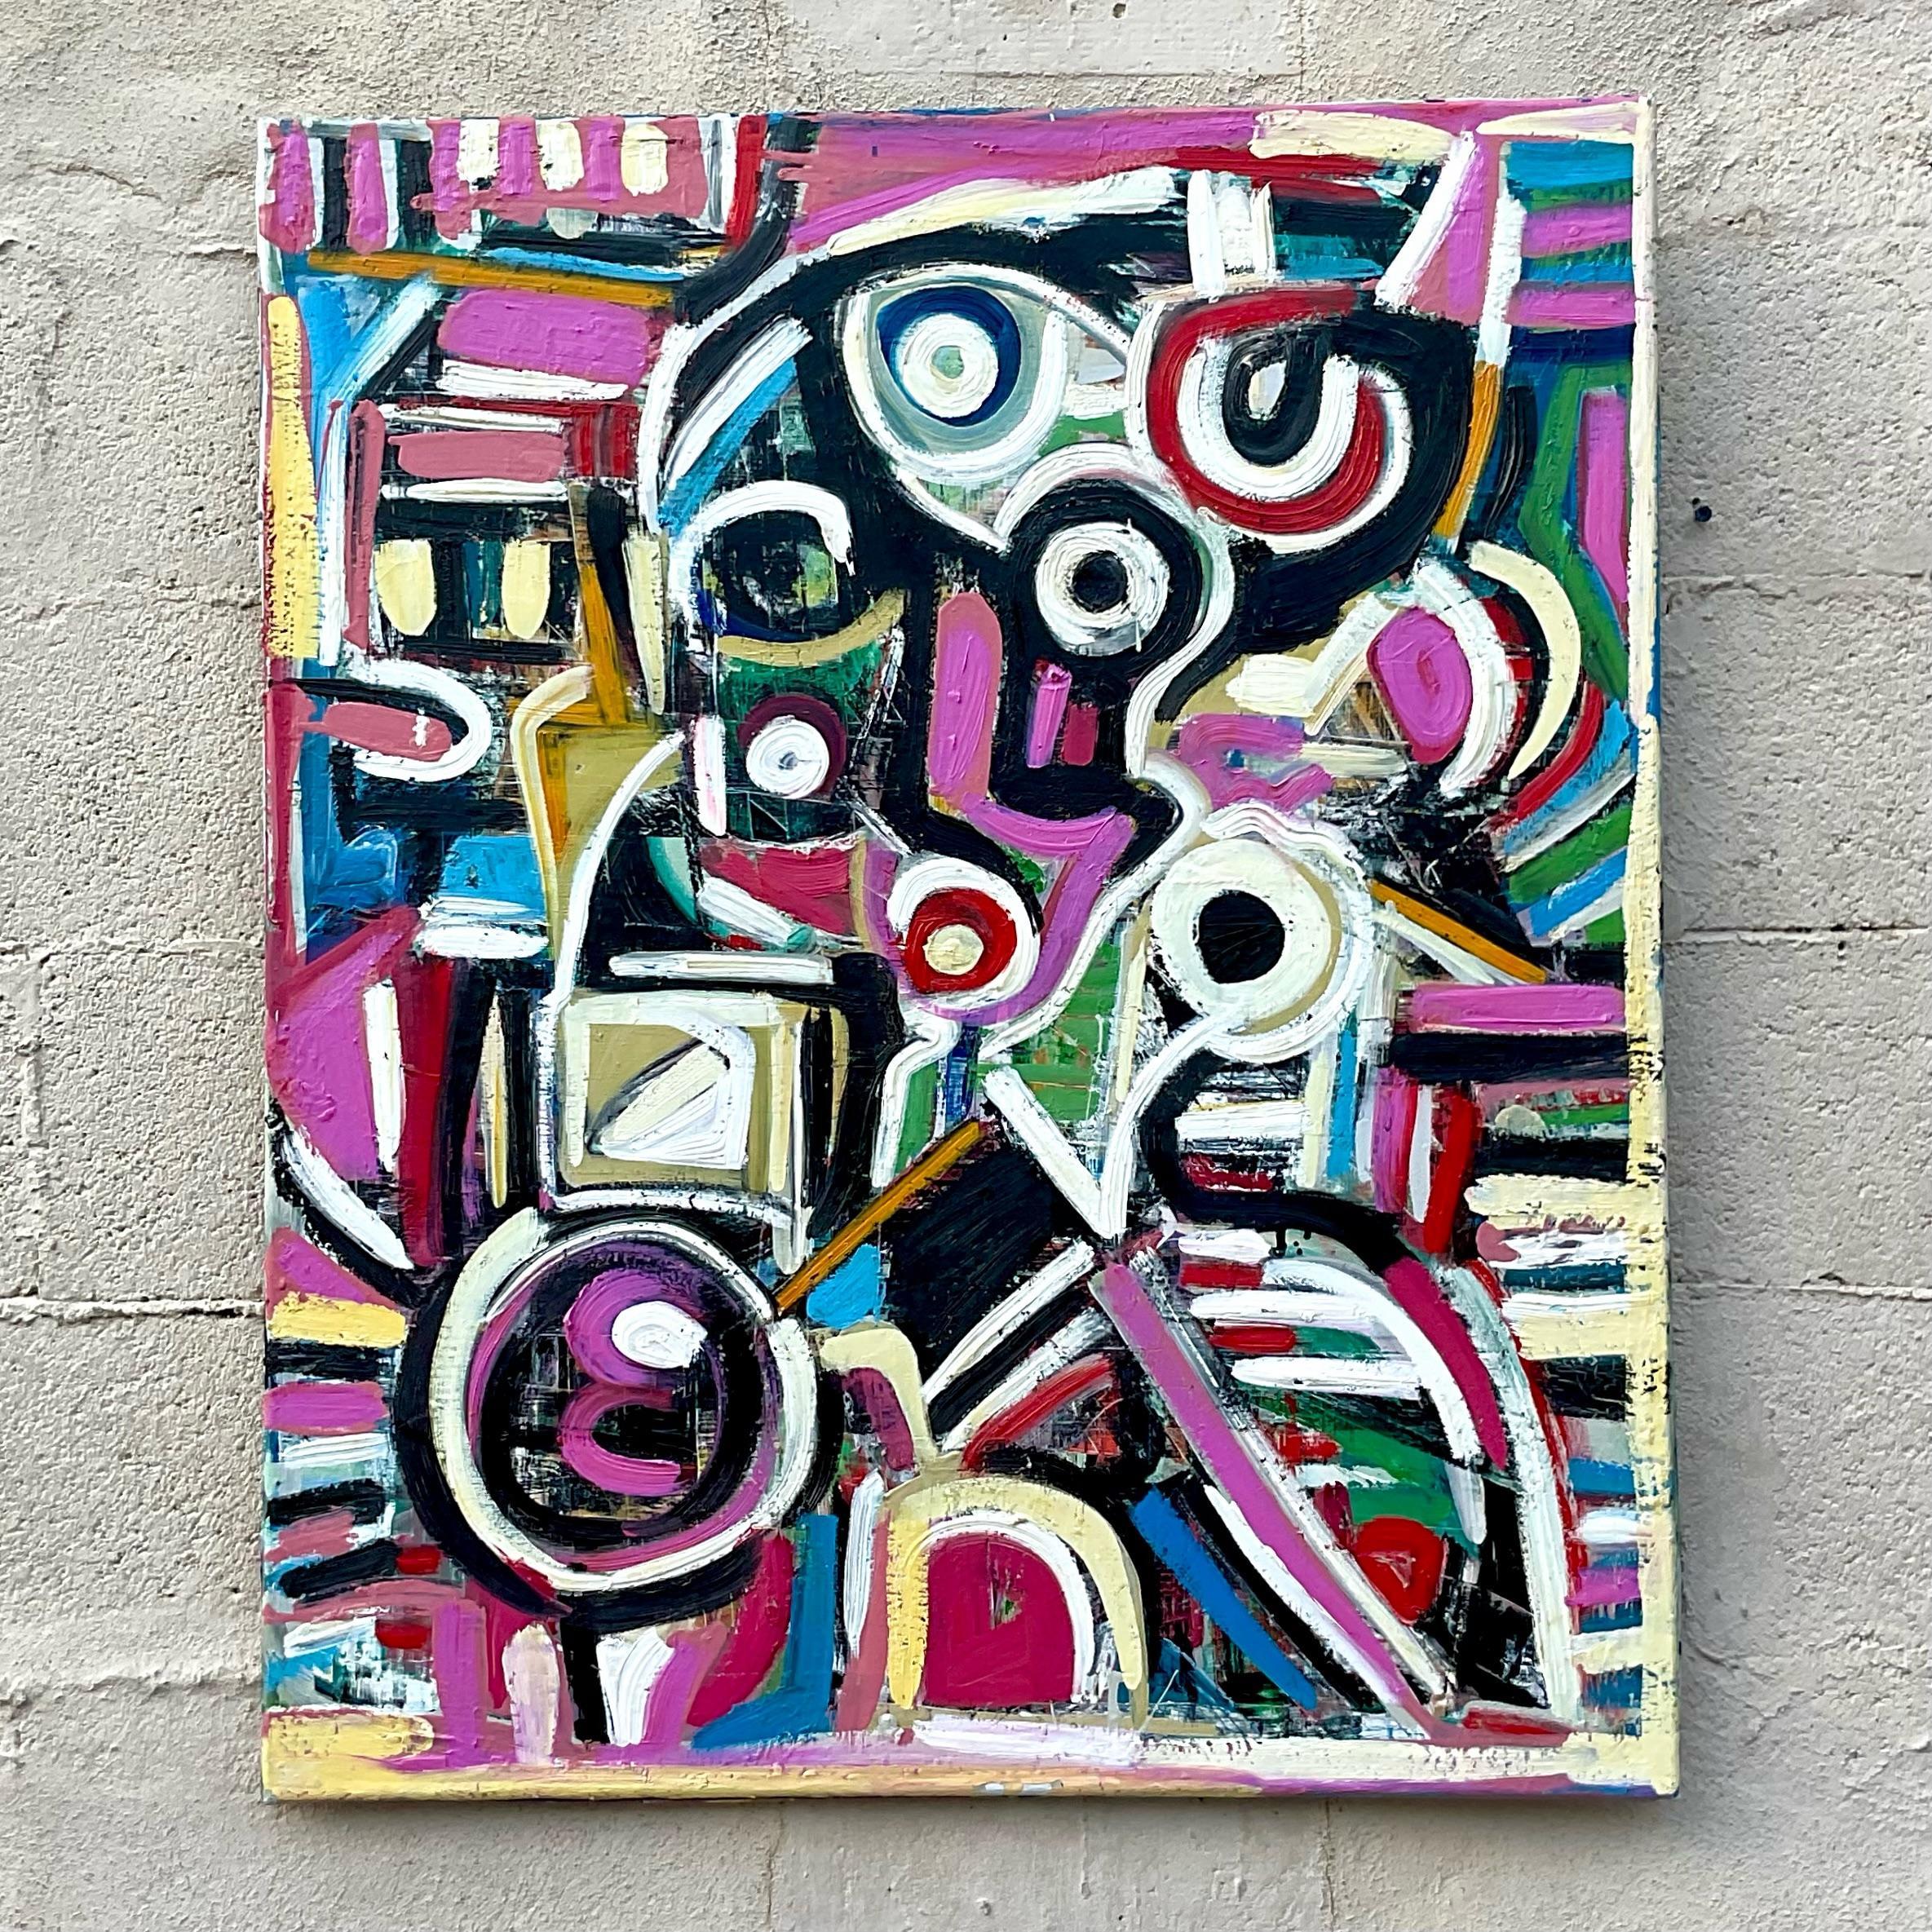 North American Vintage Geometric Vibrant Terry J Frid Oil on Canvas For Sale